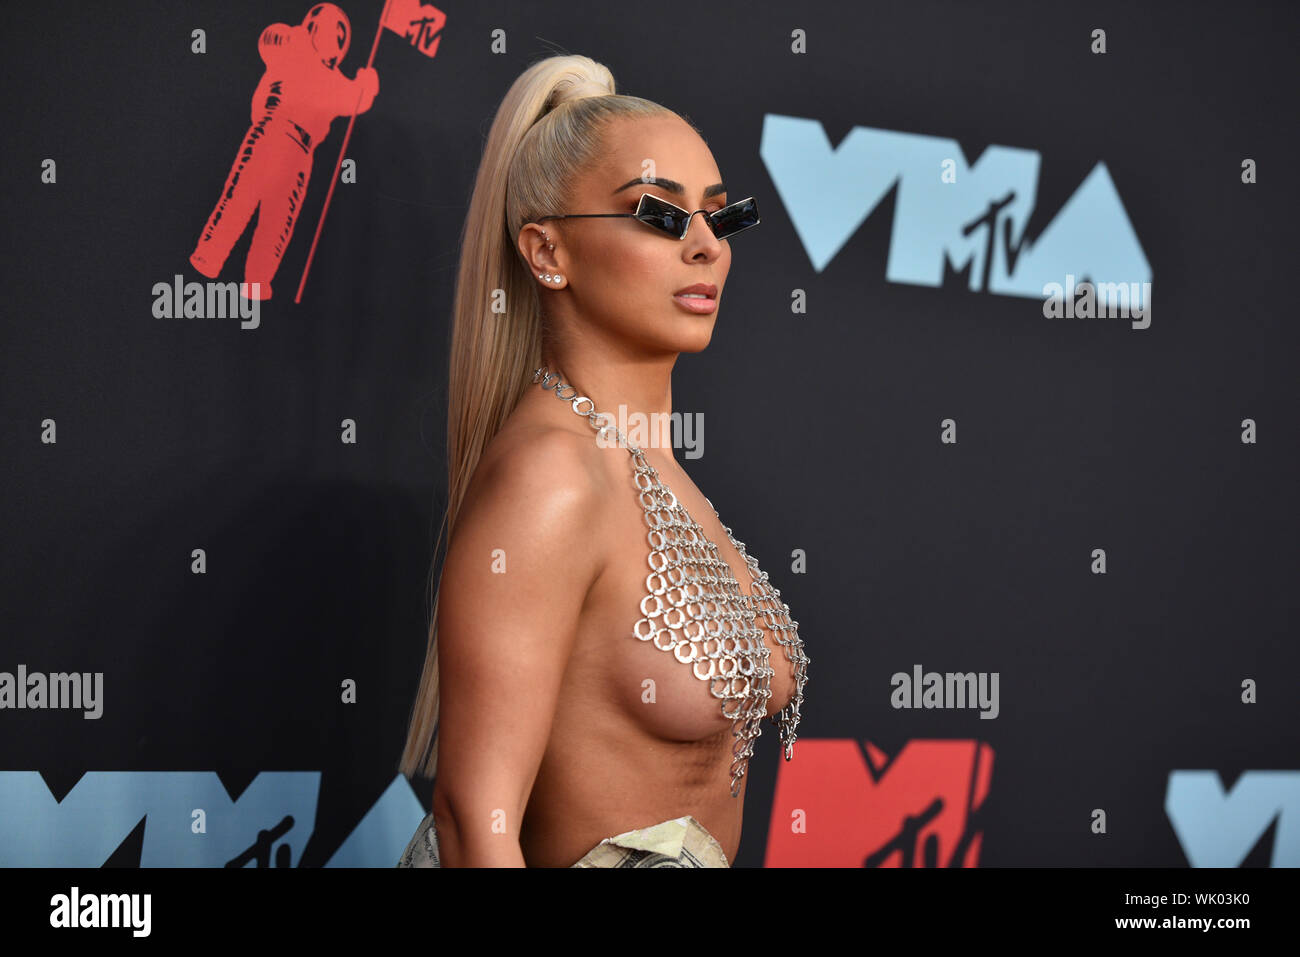 Veronica Vega attends the 2019 MTV Video Music Awards at Prudential Center on August 26, 2019 in Newark, New Jersey. Stock Photo